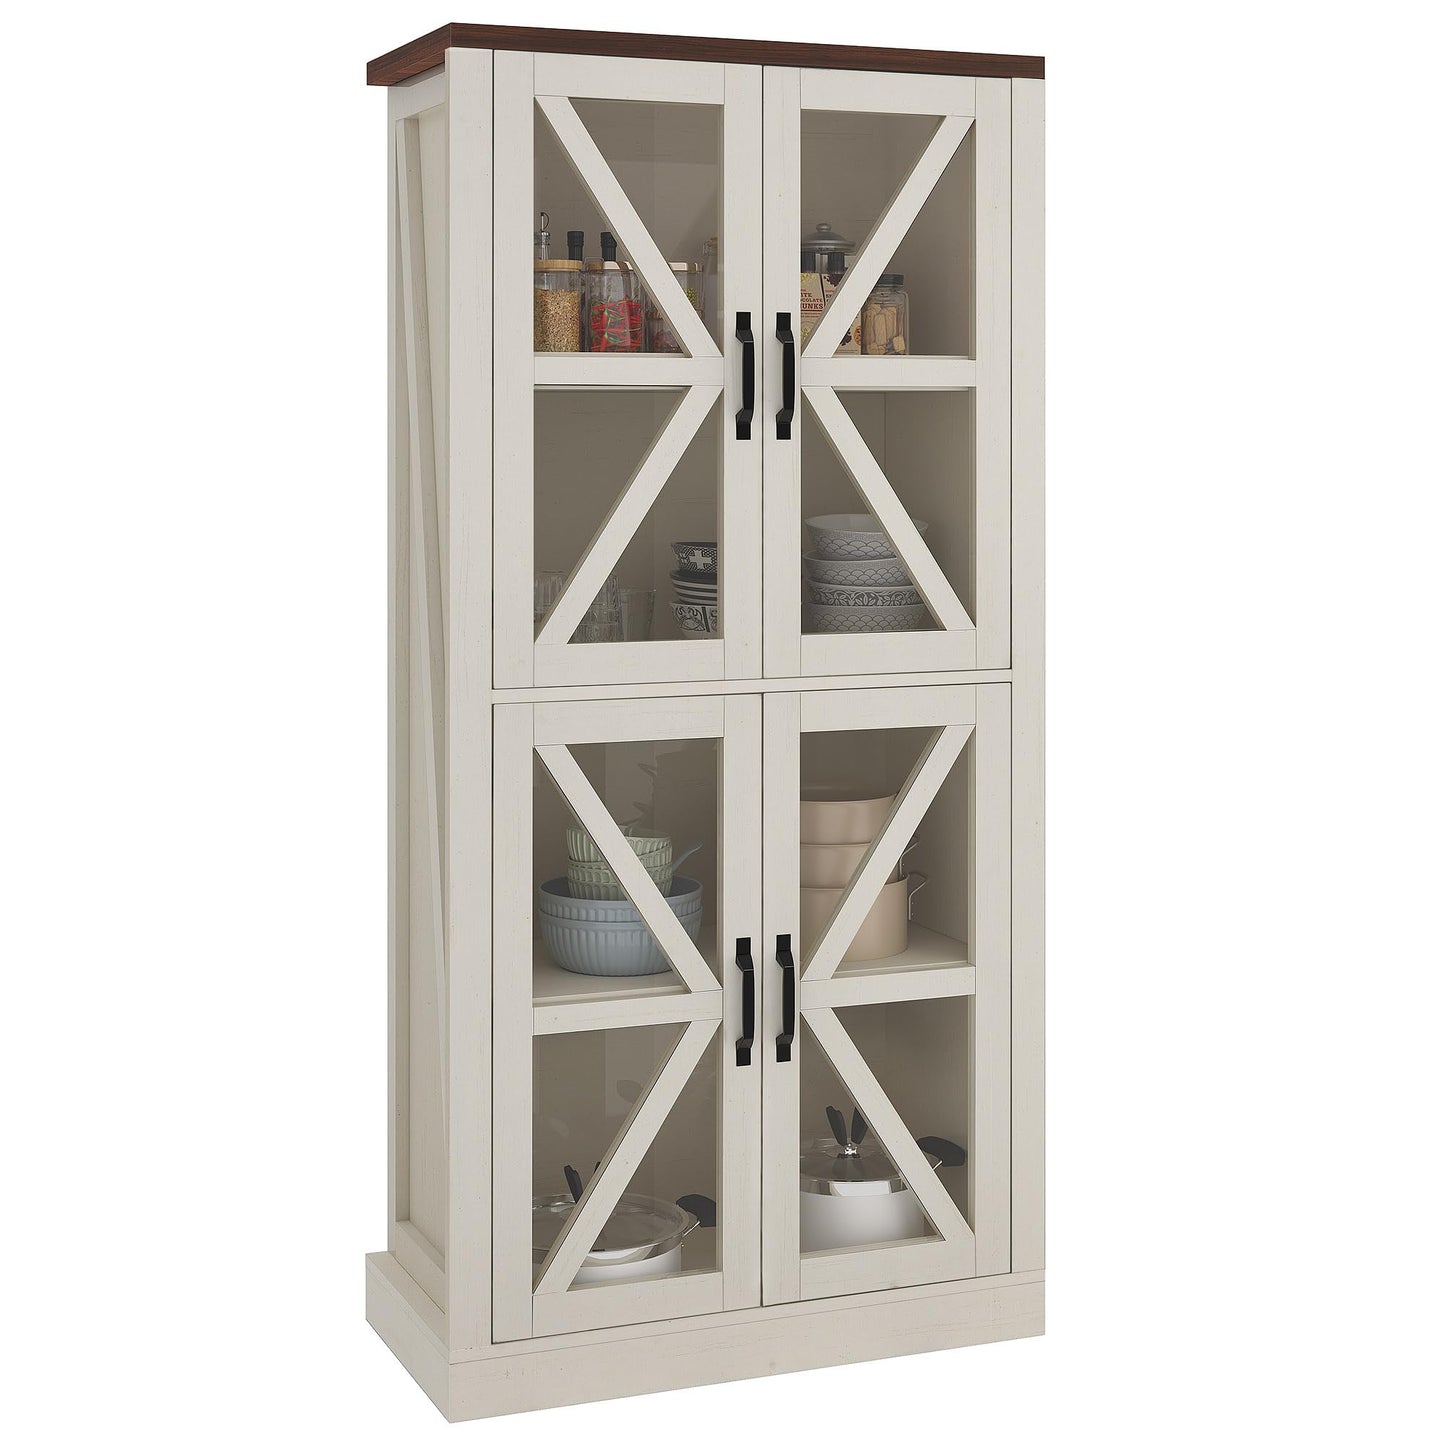 DWVO 66" Kitchen Pantry Storage Cabinet with Glass Doors, 4-Tier Large Wood Storage Cabinet, Tall Freestanding Hutch for Living Room,Dinning Room and Kitchen, White